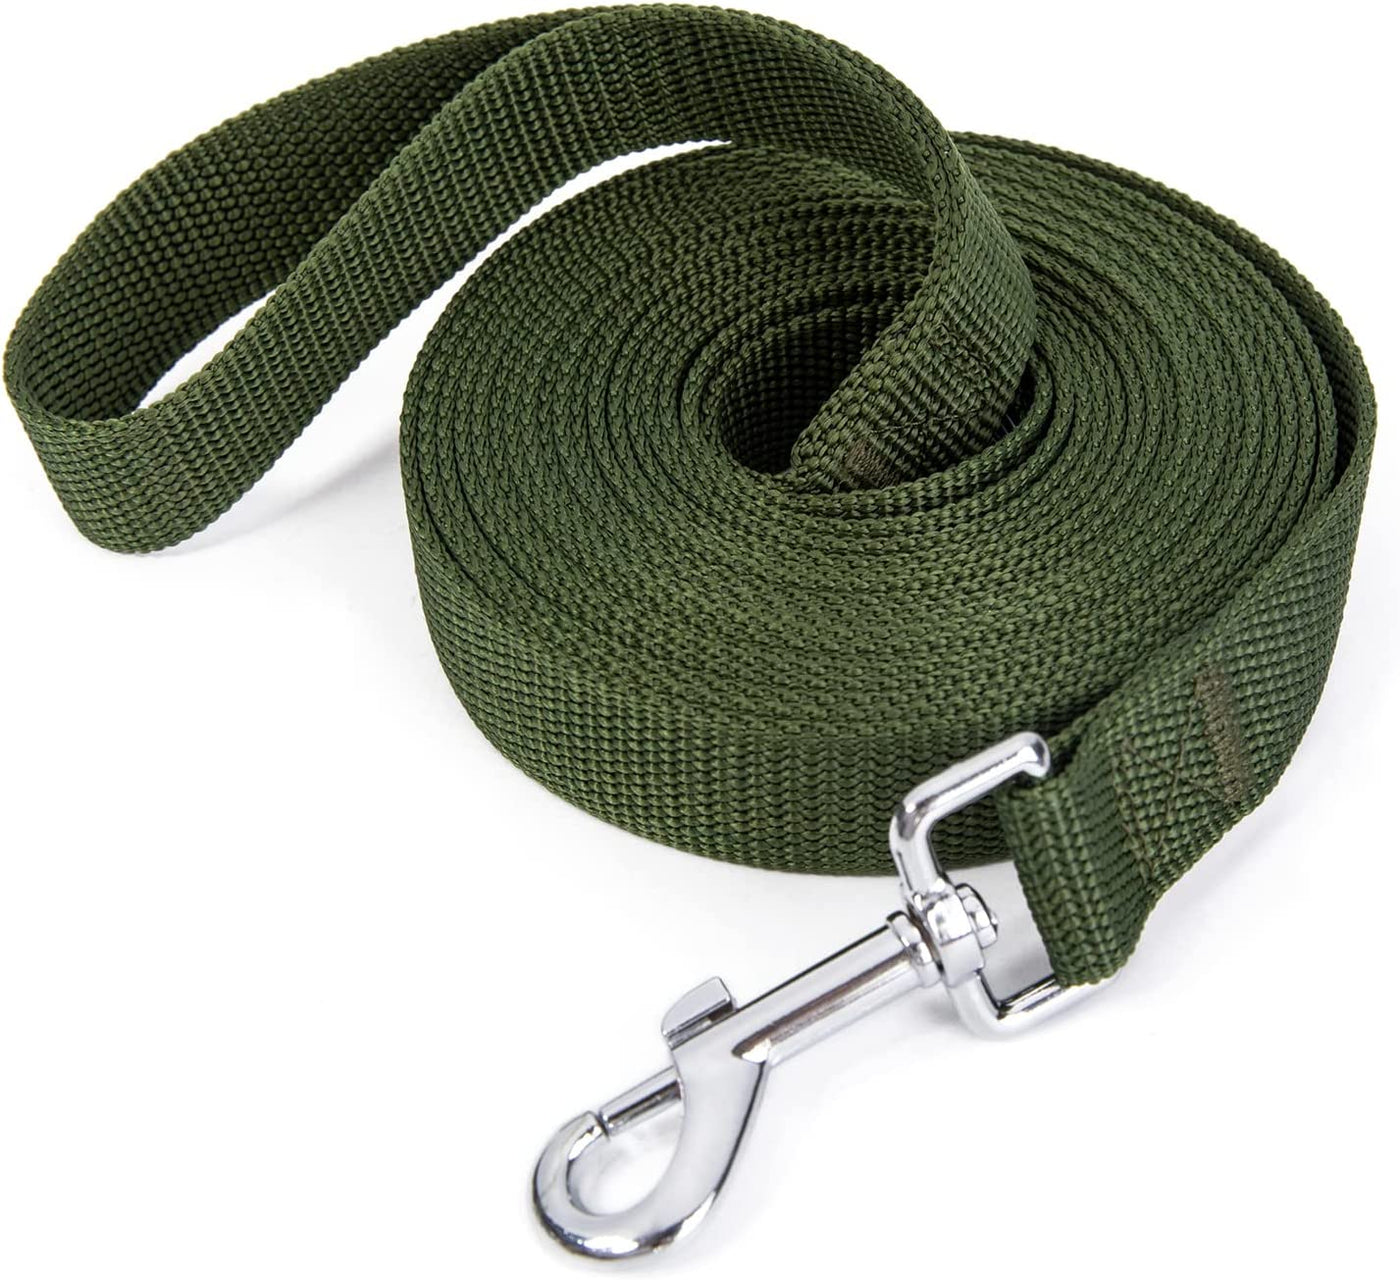 Strong Durable Nylon Dog Training Leash, Traction Rope, 10 Feet Long, 1 Inch Wide, for Small and Medium Dog 